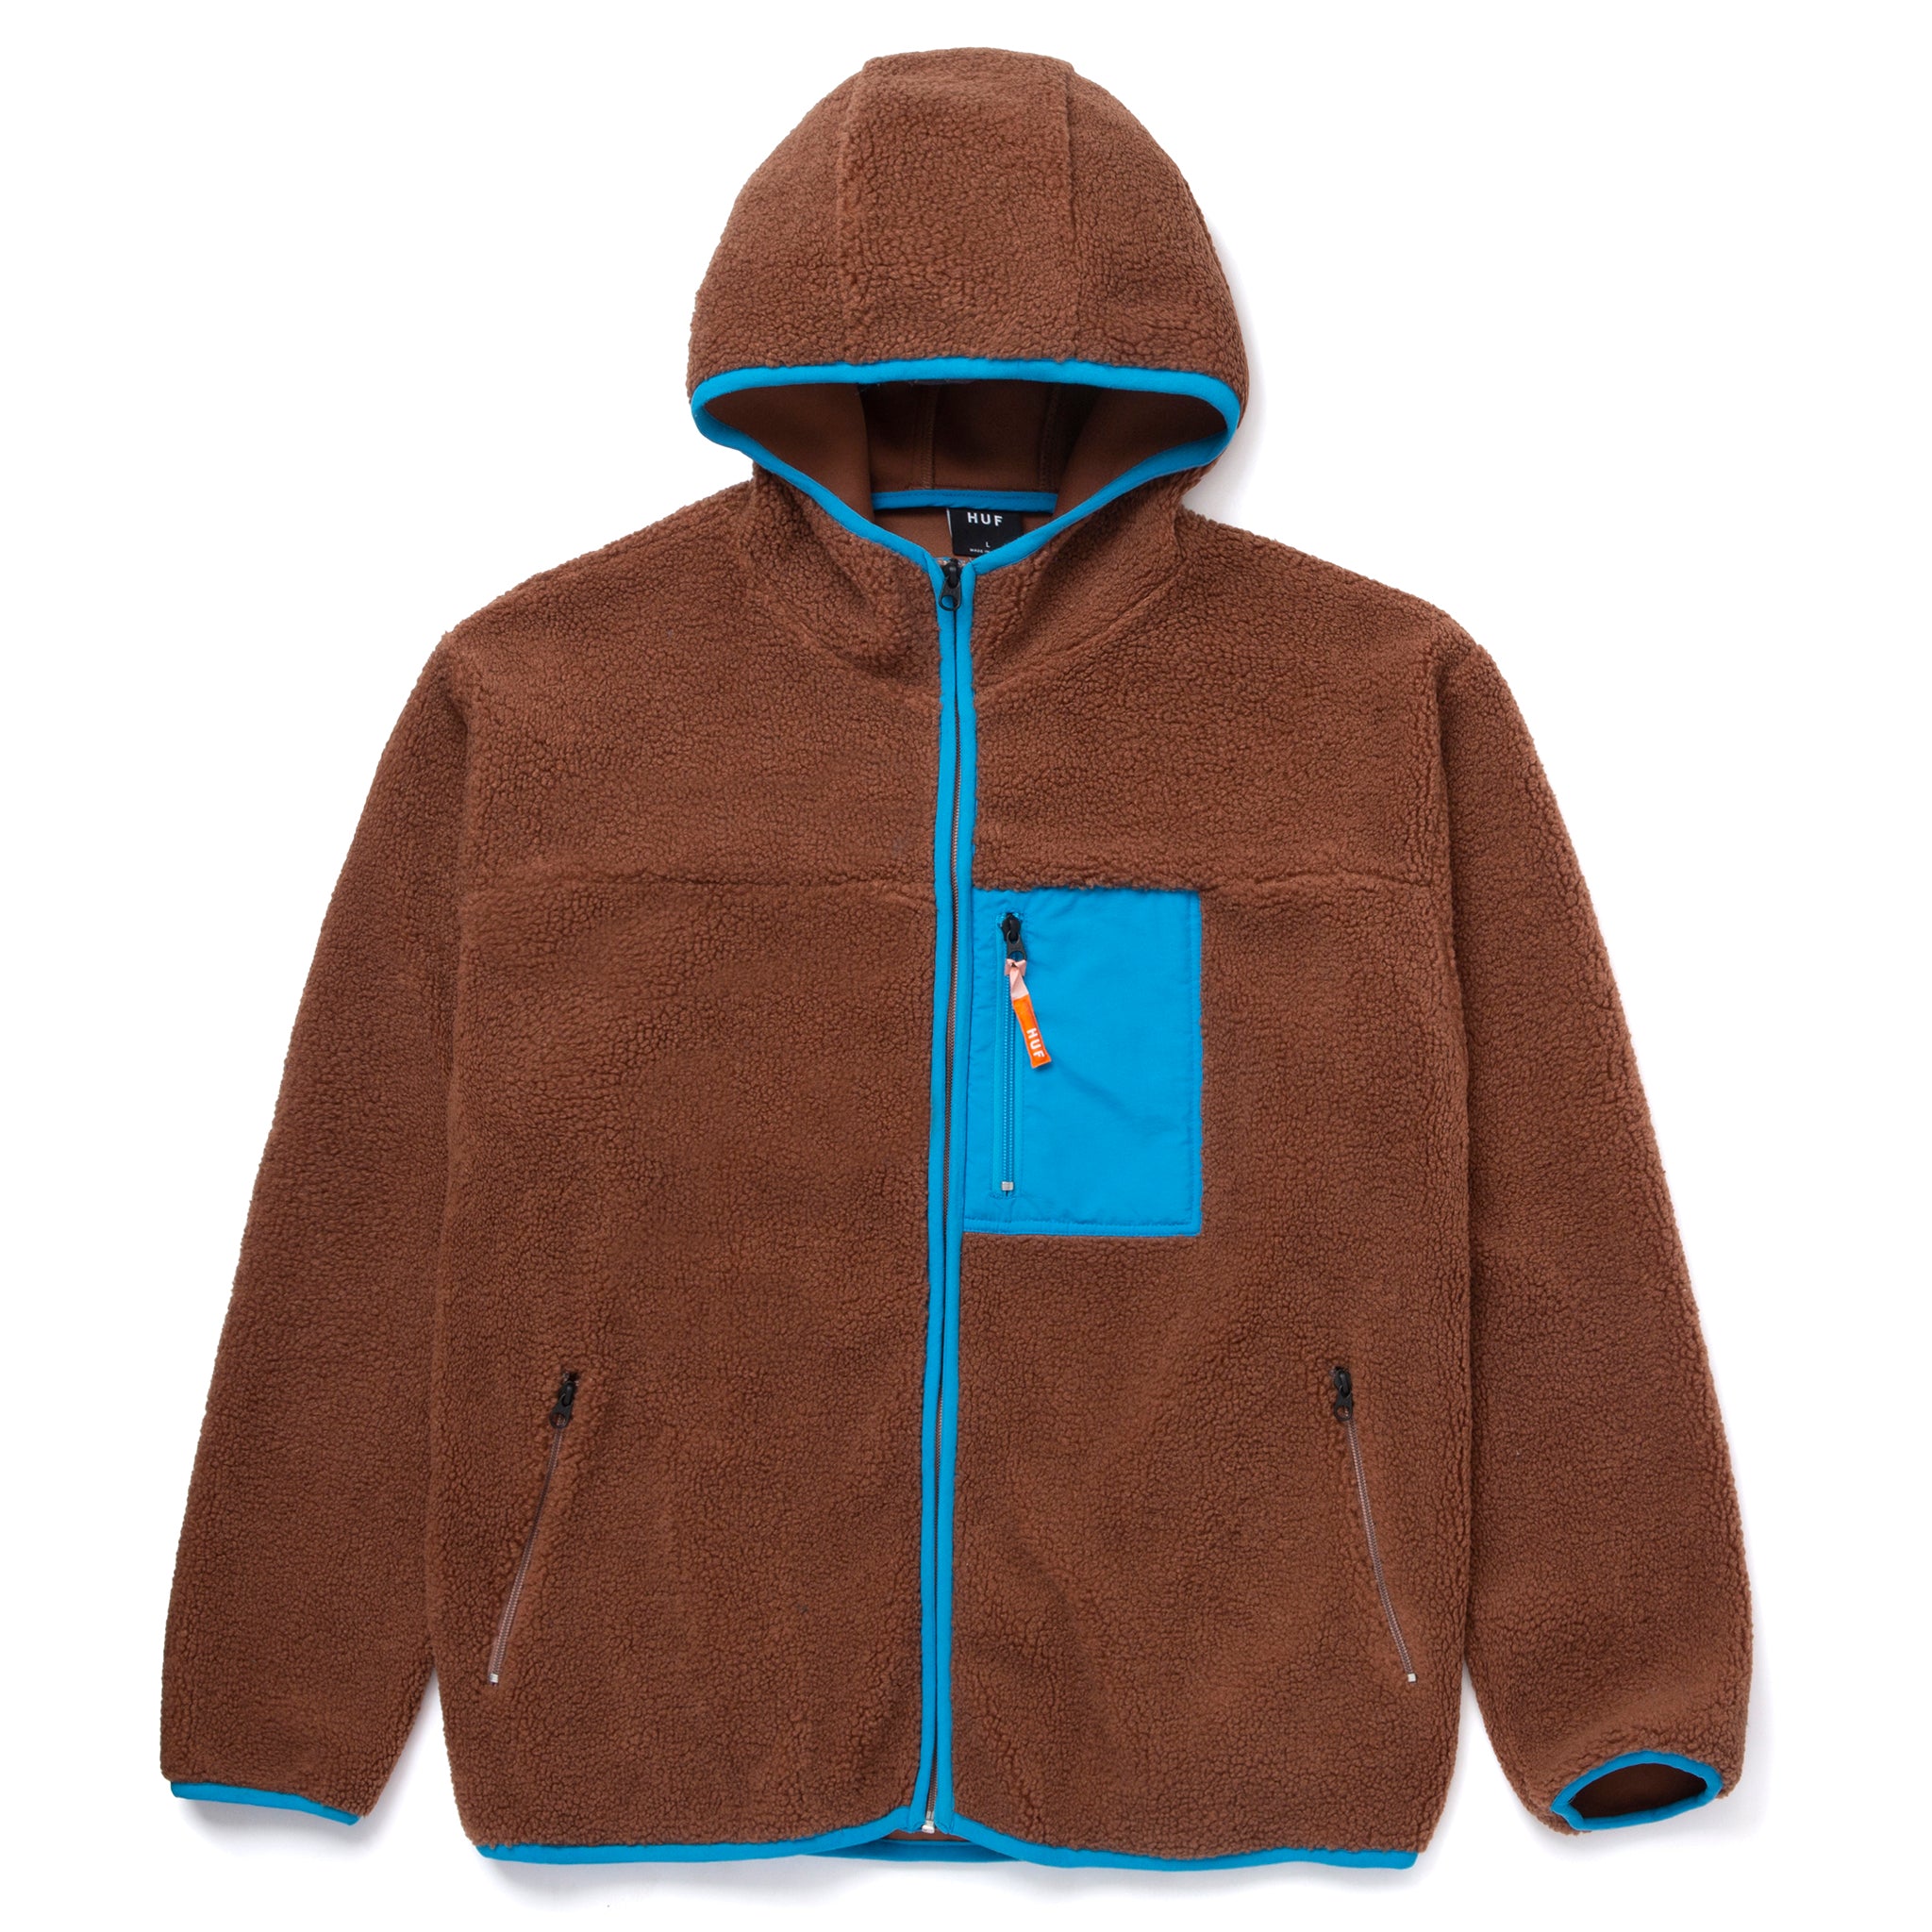 Fort Point Sherpa Jacket